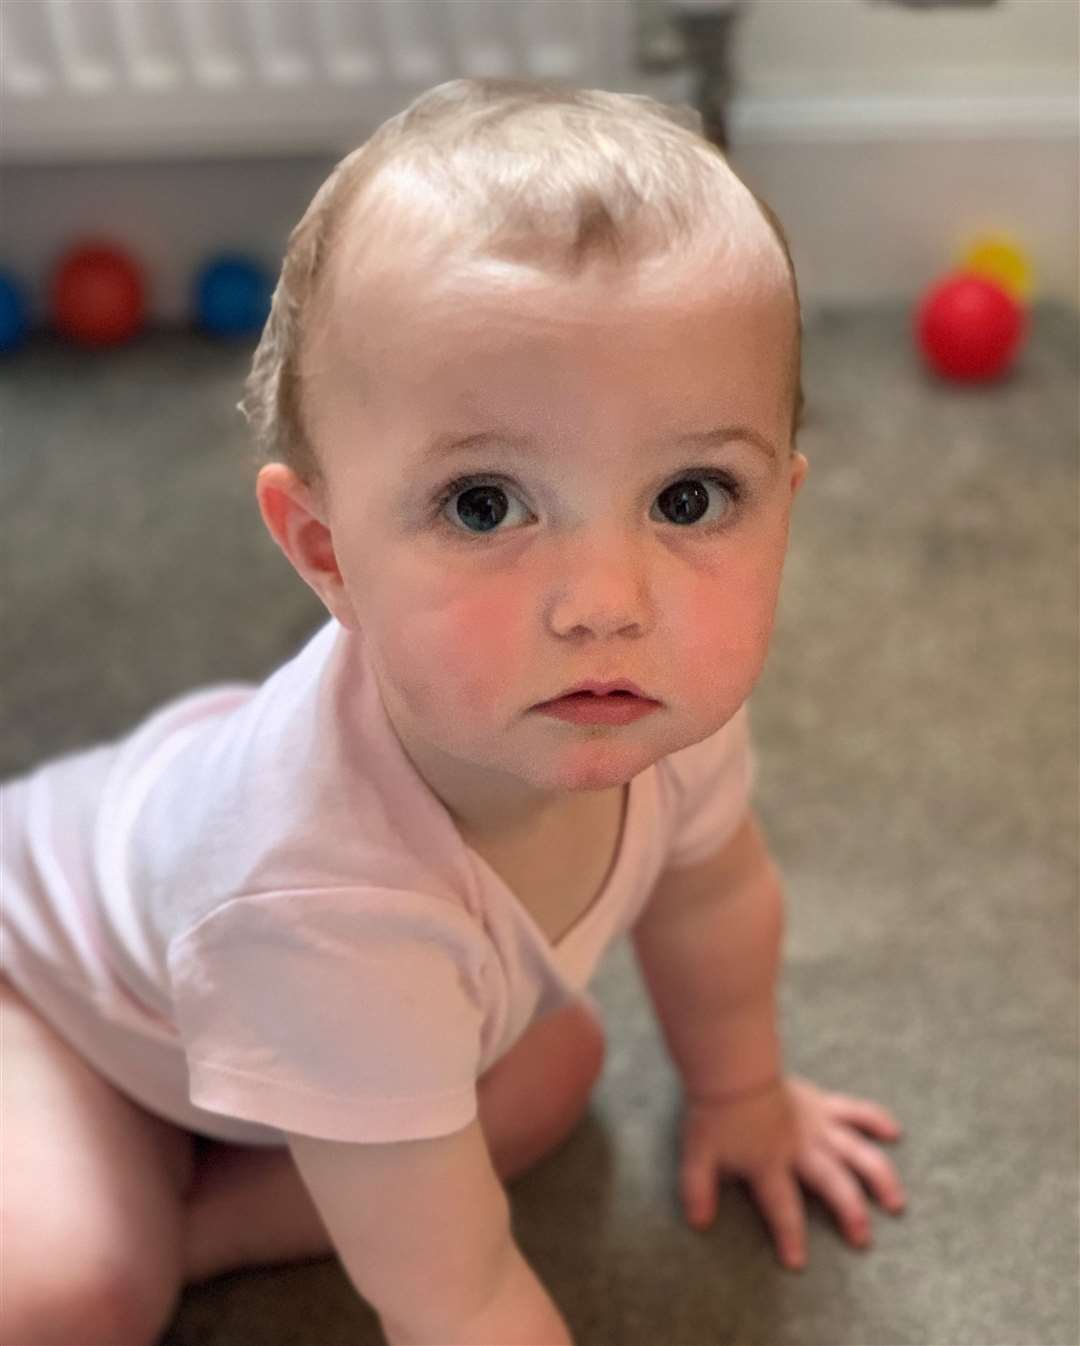 Dan's granddaughter Jess recently turned one year old.